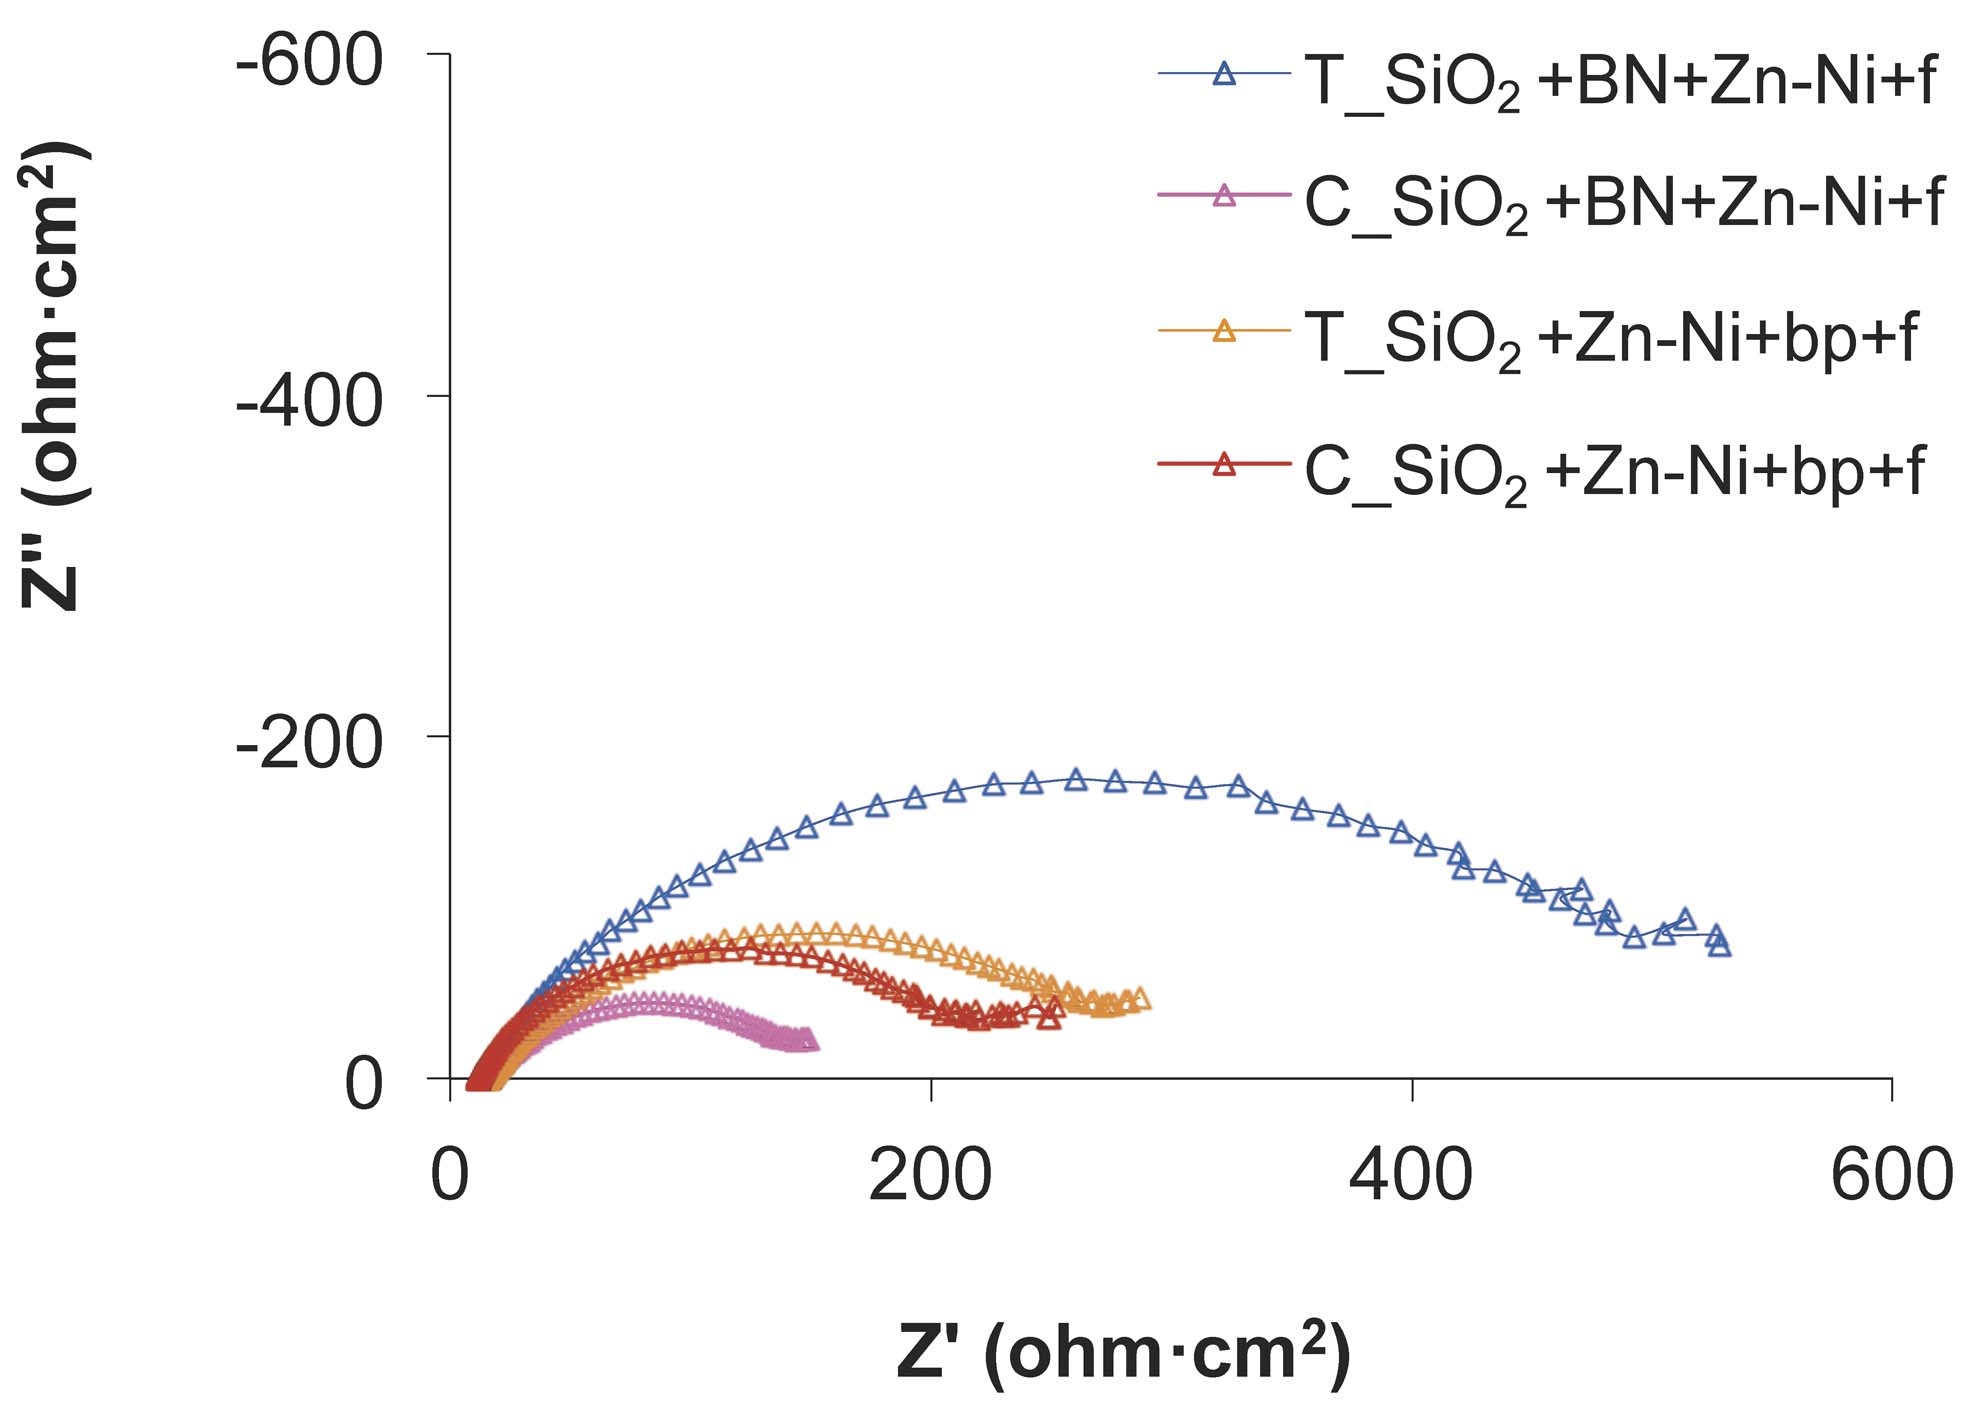 Fig. 11: Nyquist diagrams for SiO2+BN+Zn-Ni+bp+f and SiO2+Zn-Ni+bp+f samples, before and after the wear test